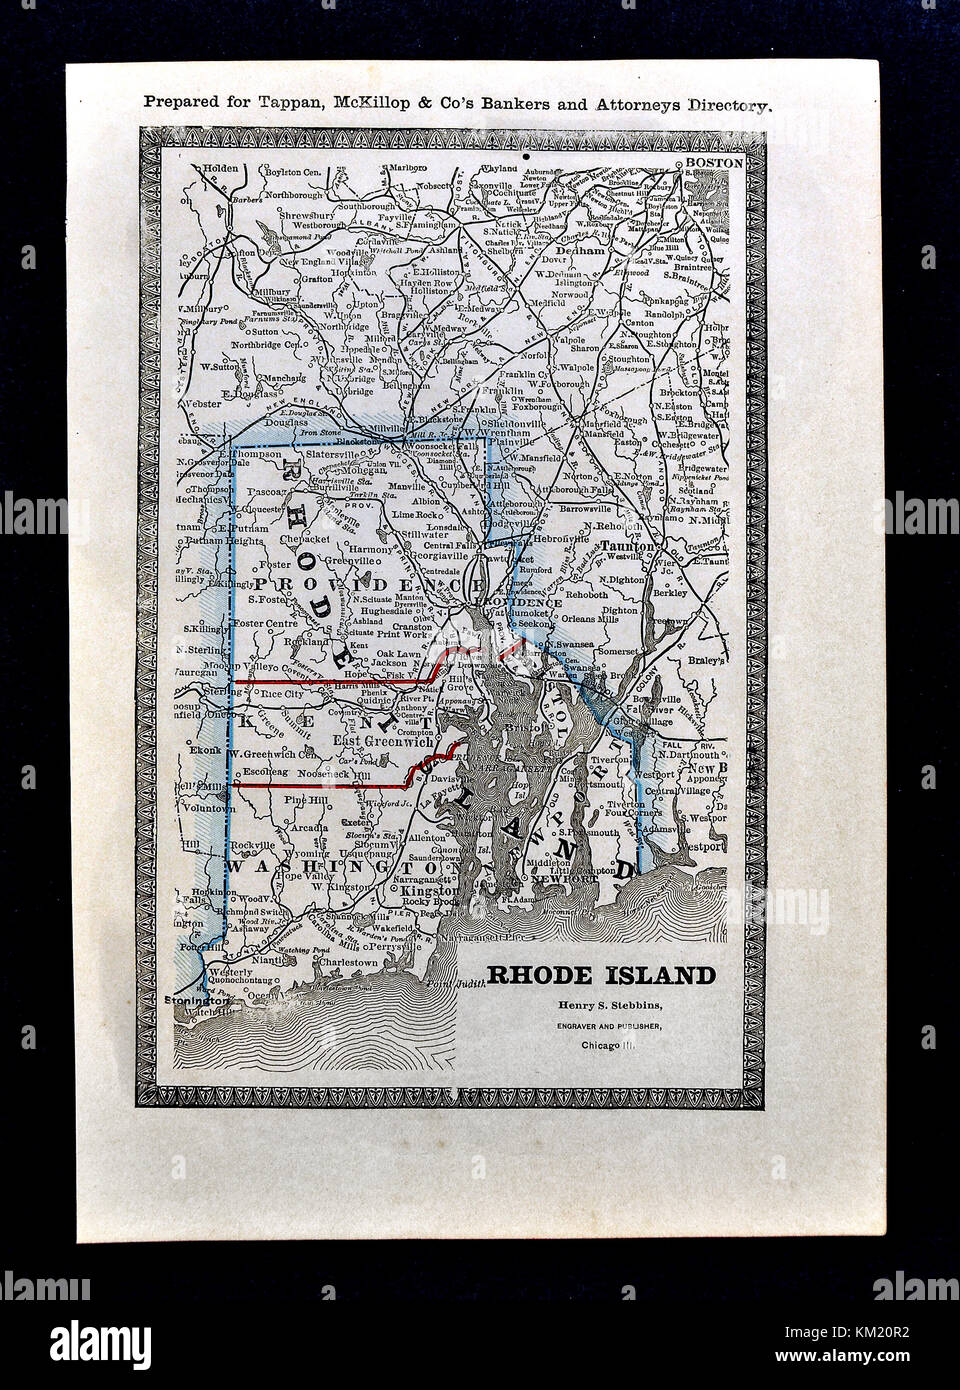 George Cram Antique Map from 1866 Atlas for Attorneys and Bankers: United States - Rhode Island - Providence Bristol Newport Stock Photo